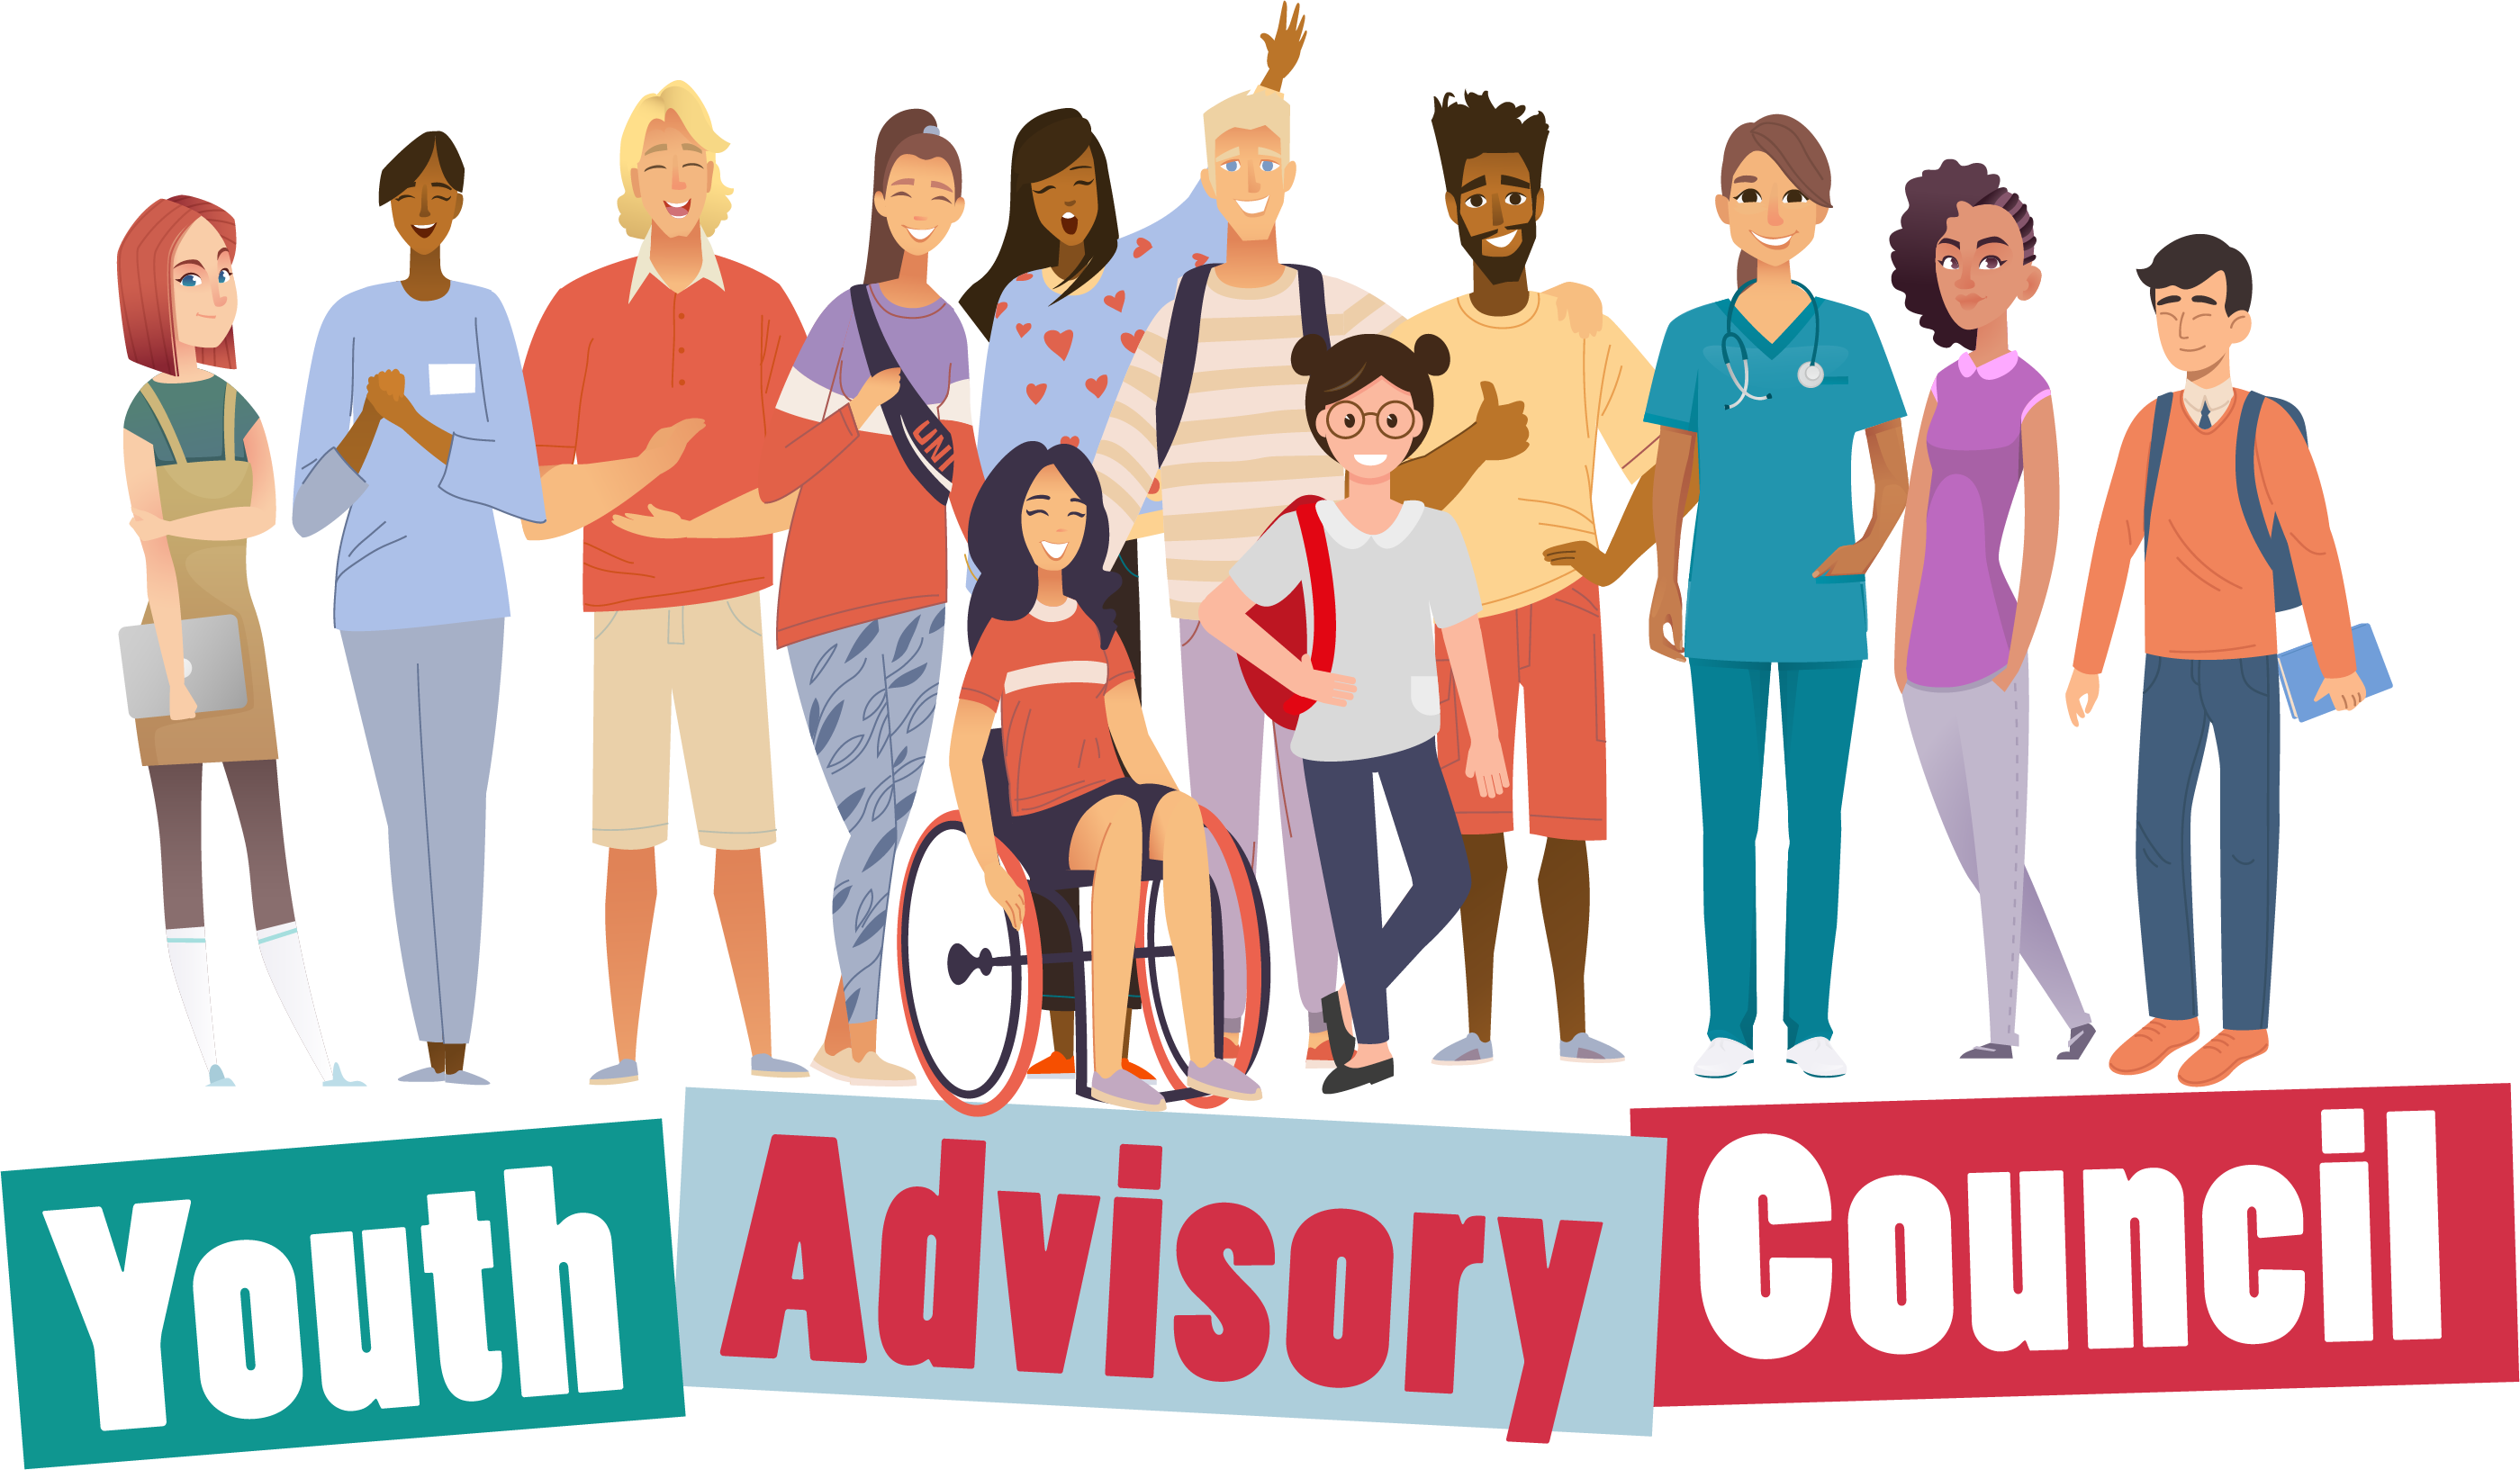 Youth Advisory Council graphic